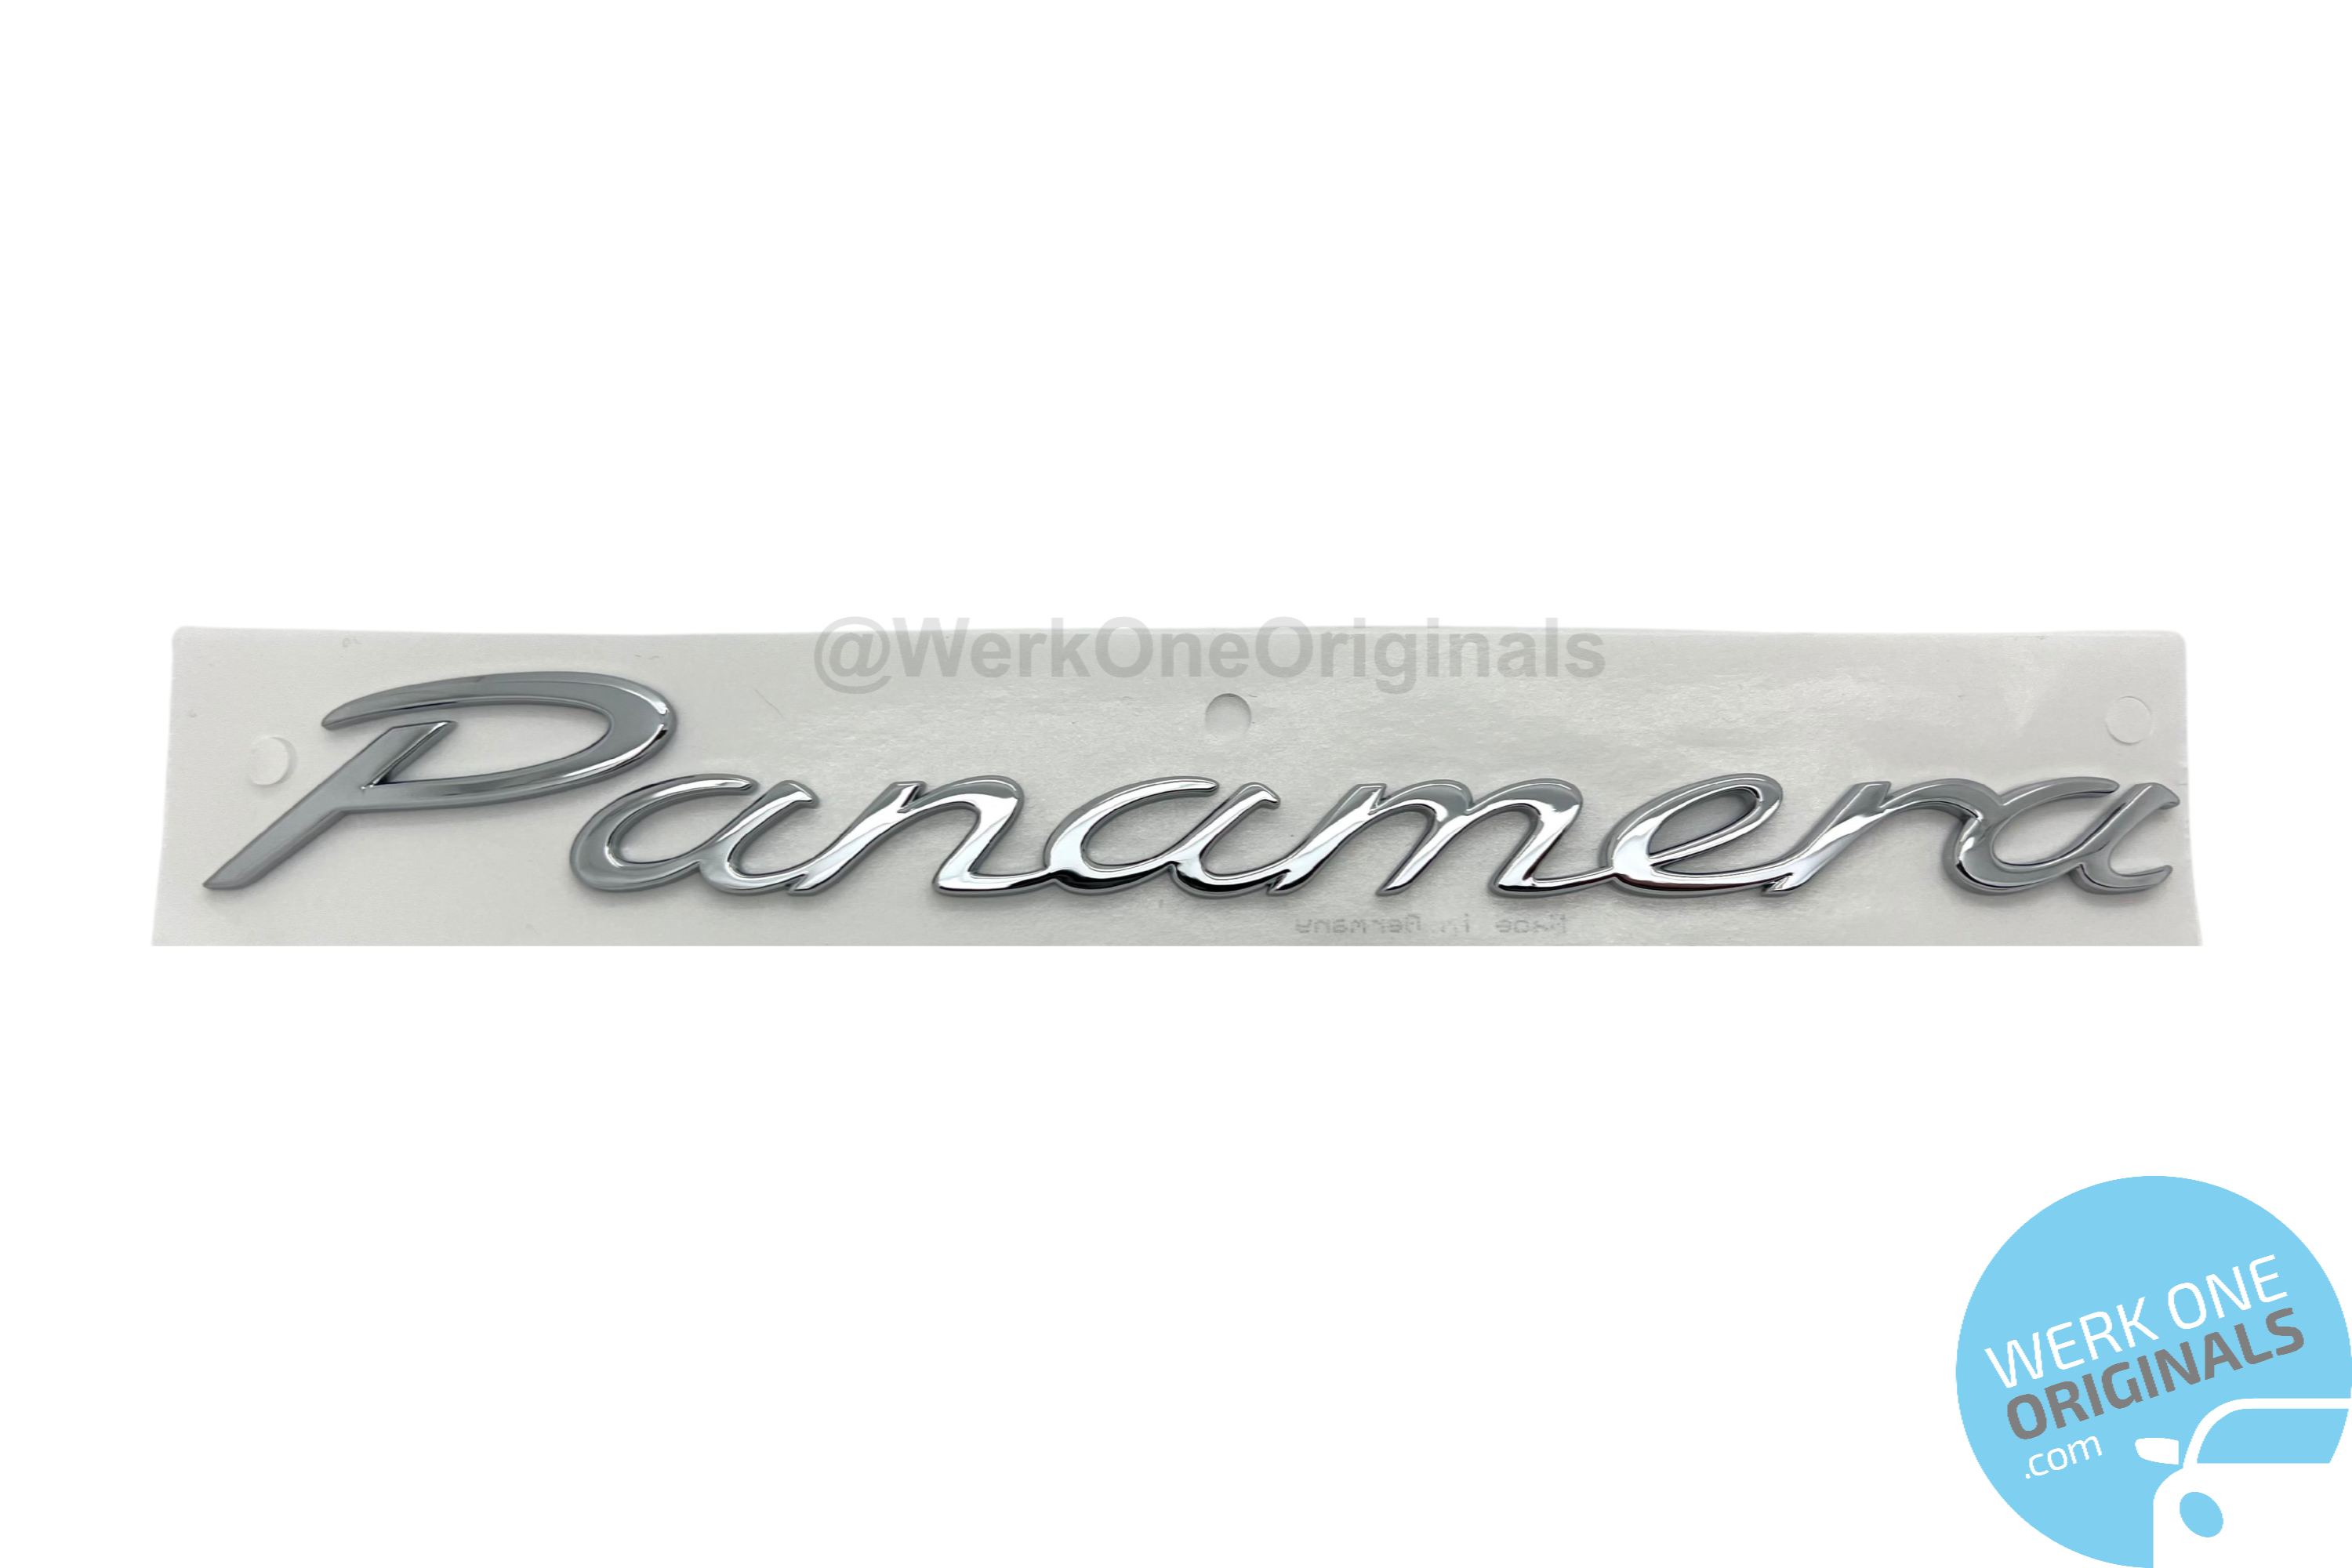 Porsche 'Panamera' Rear Badge Decal in Chrome Silver for Panamera Type 970 & 971 Models